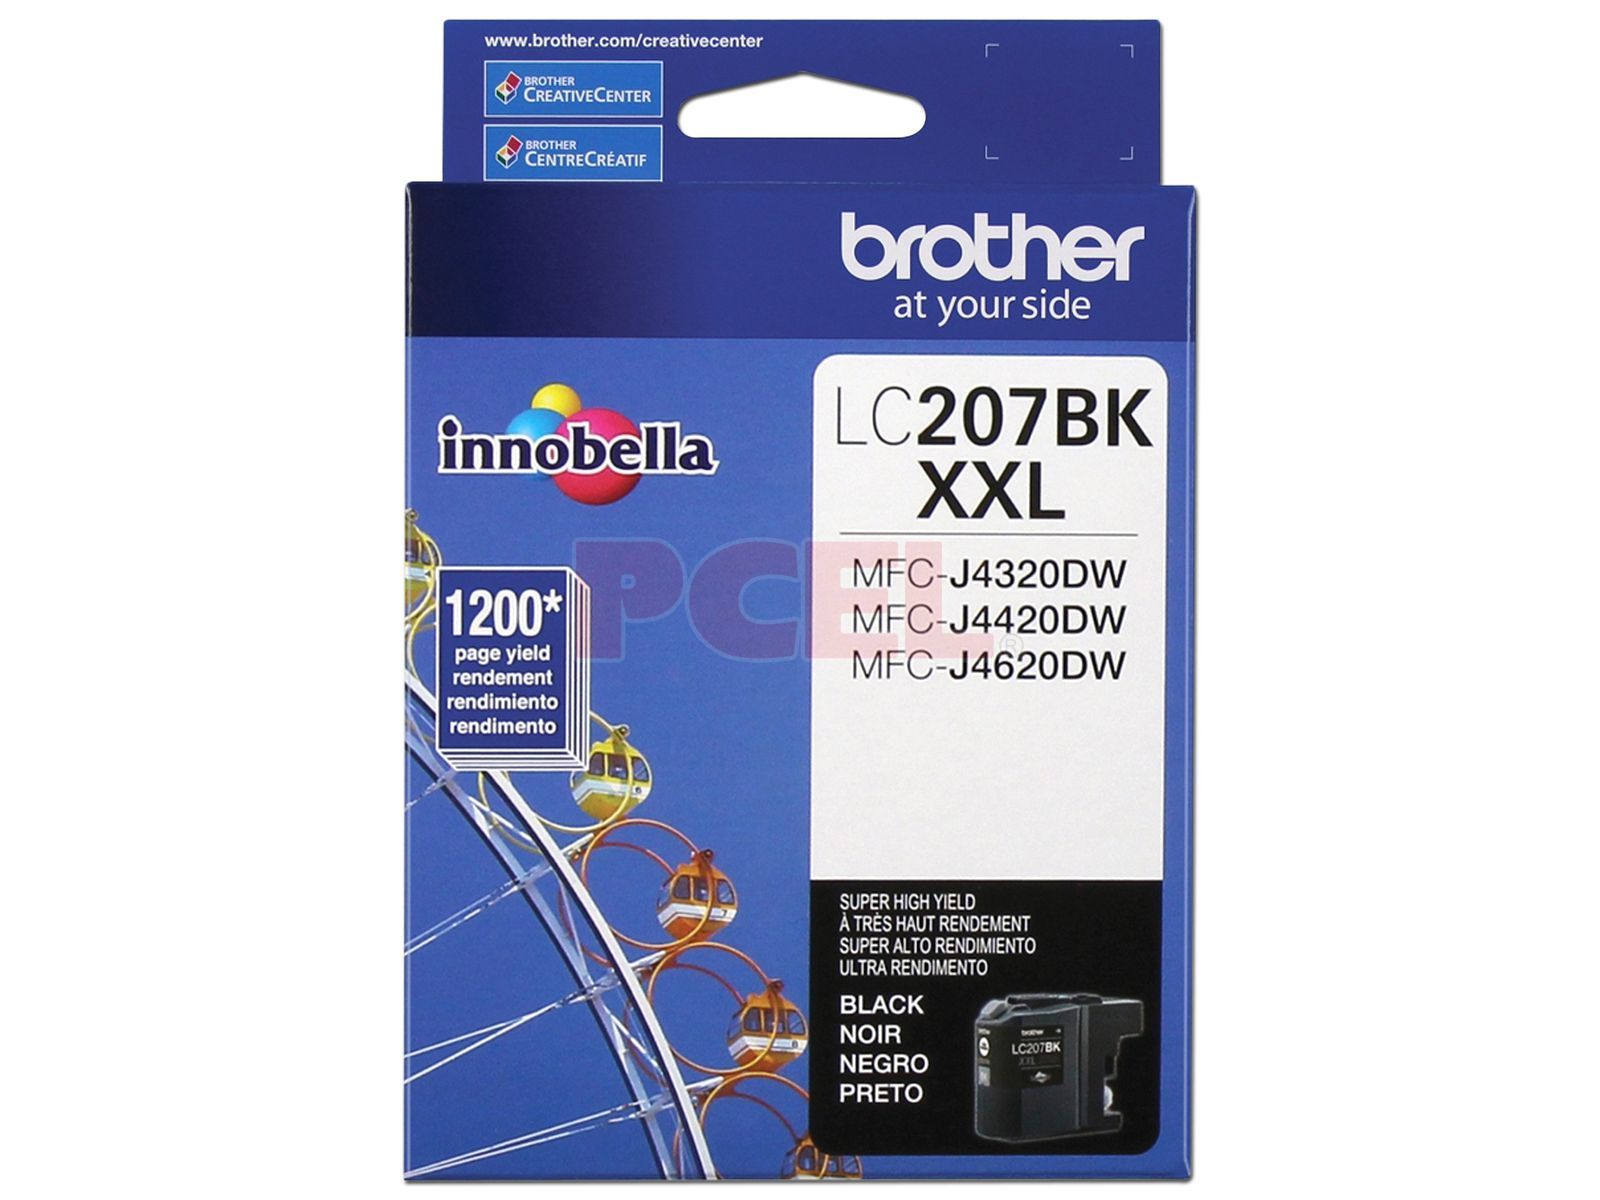 CARTUCHO BROTHER LC207BK NEGRO ALTO REND 1200 PAG LC207BK